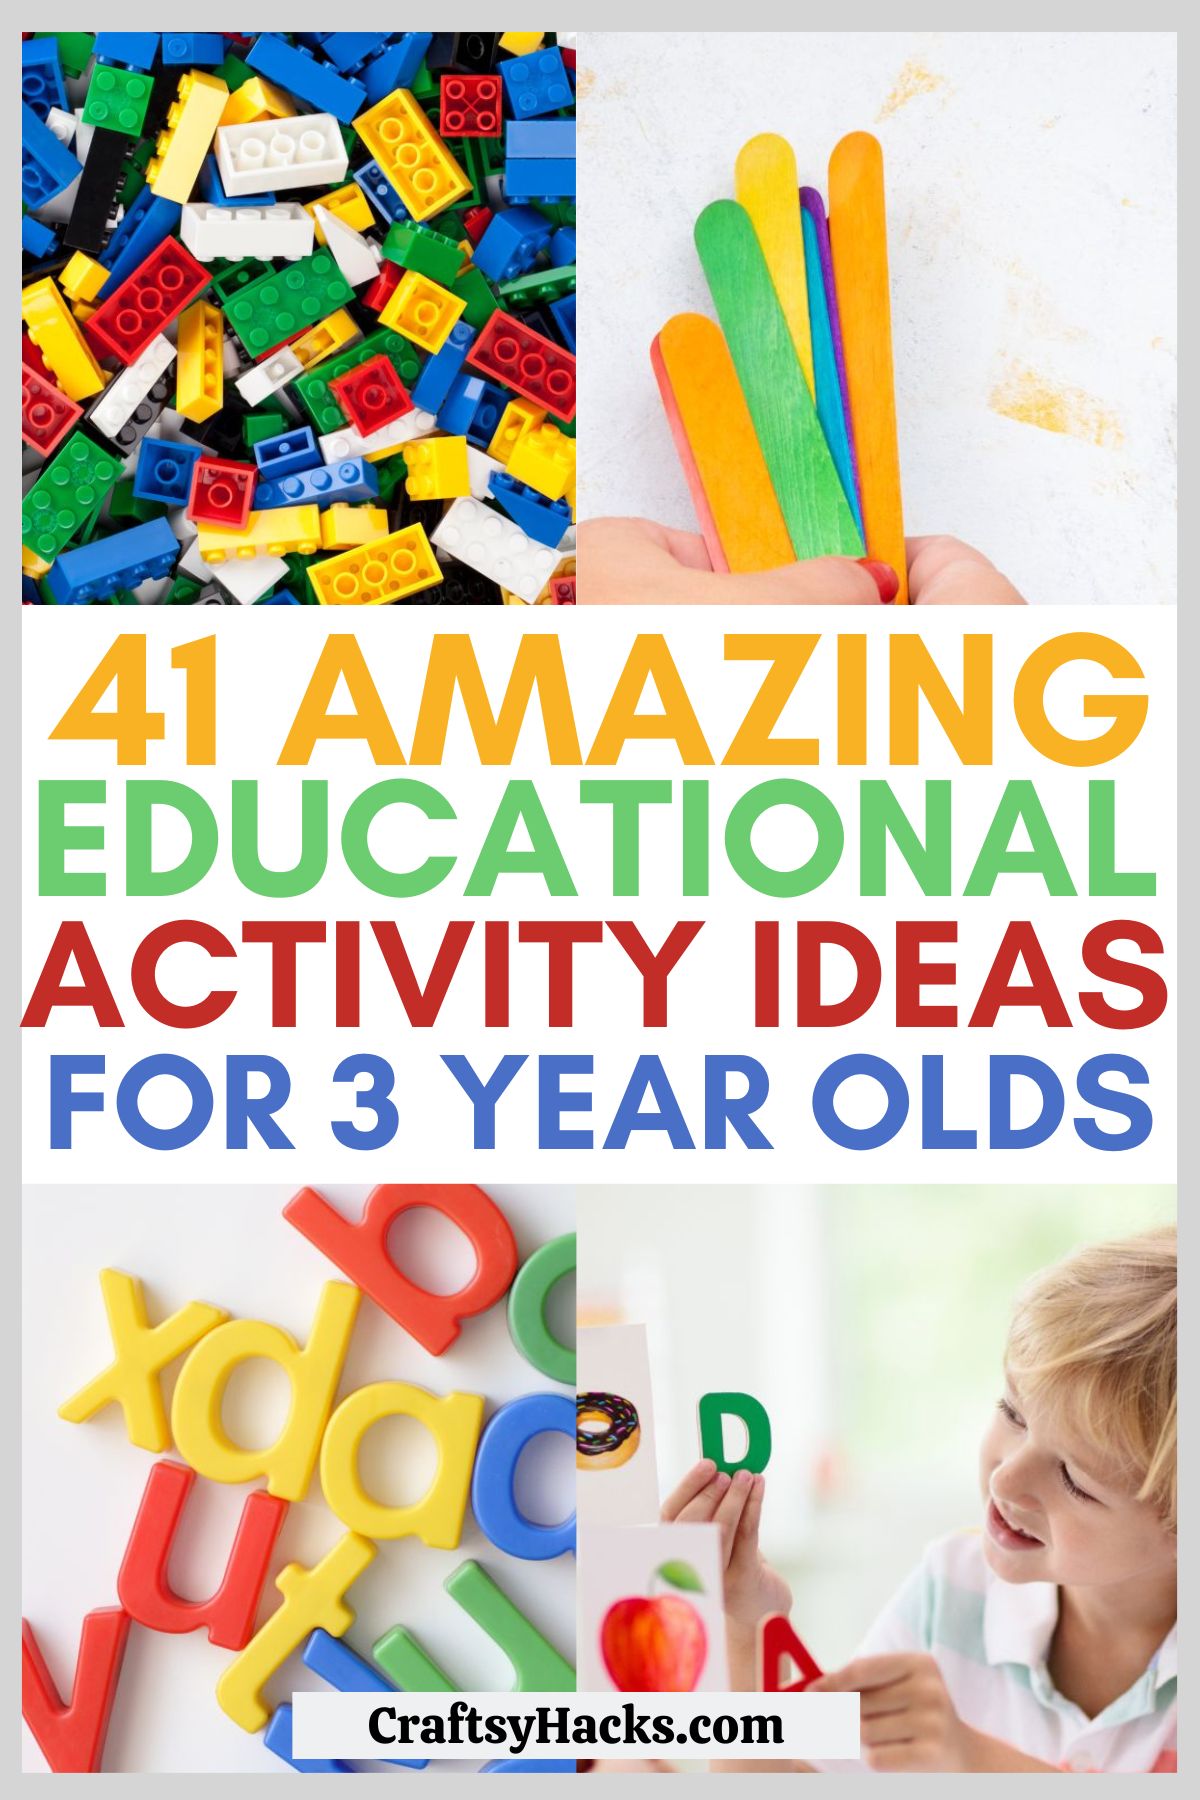 learning activities for 3 year olds